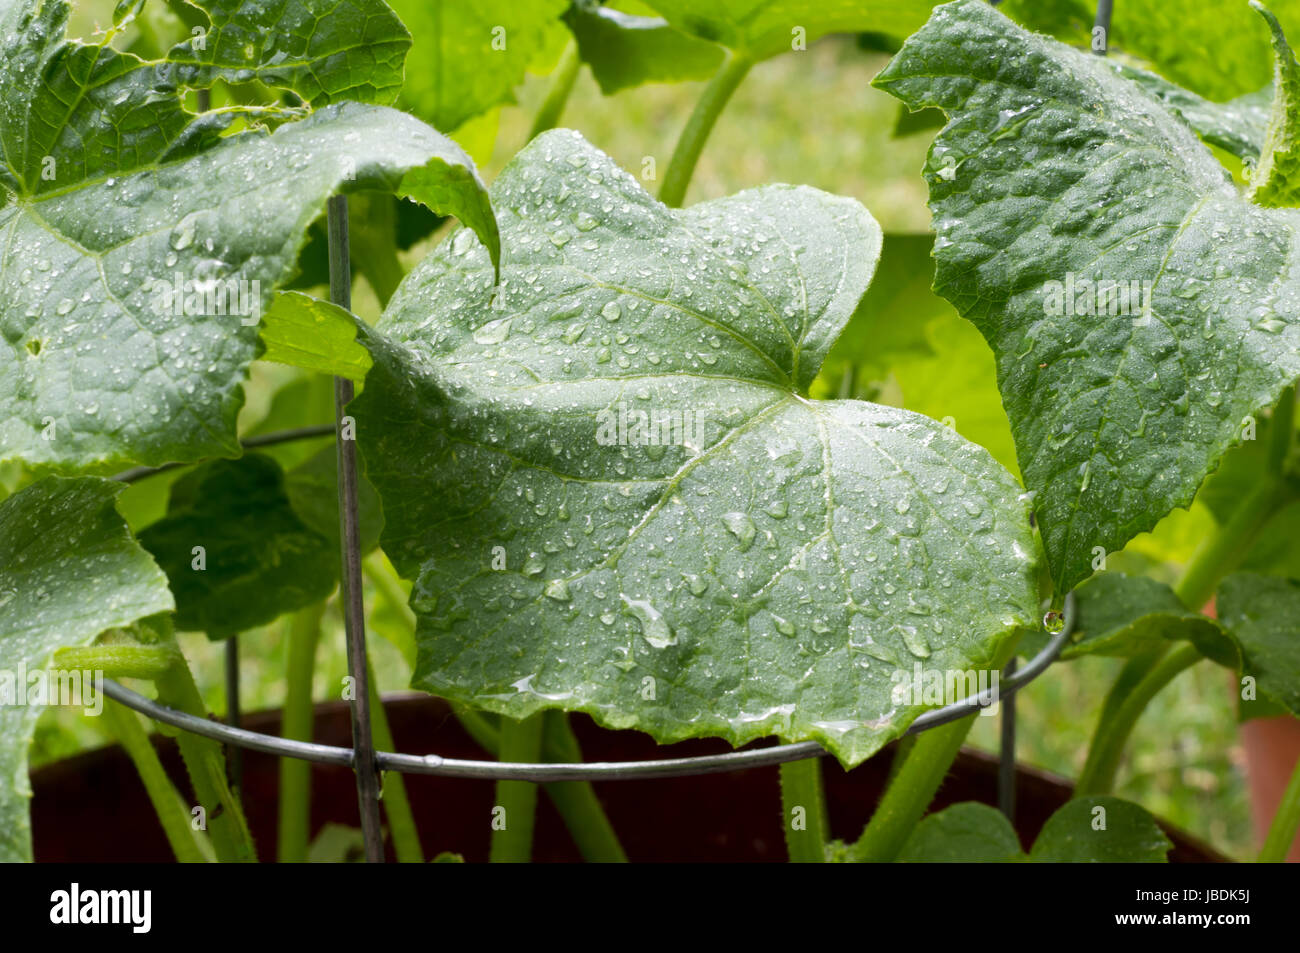 Closeup shot of cucumber leaves after rain. The cucumber plant is creeping up a wire trellis in a backyard vegetable garden. California USA Stock Photo